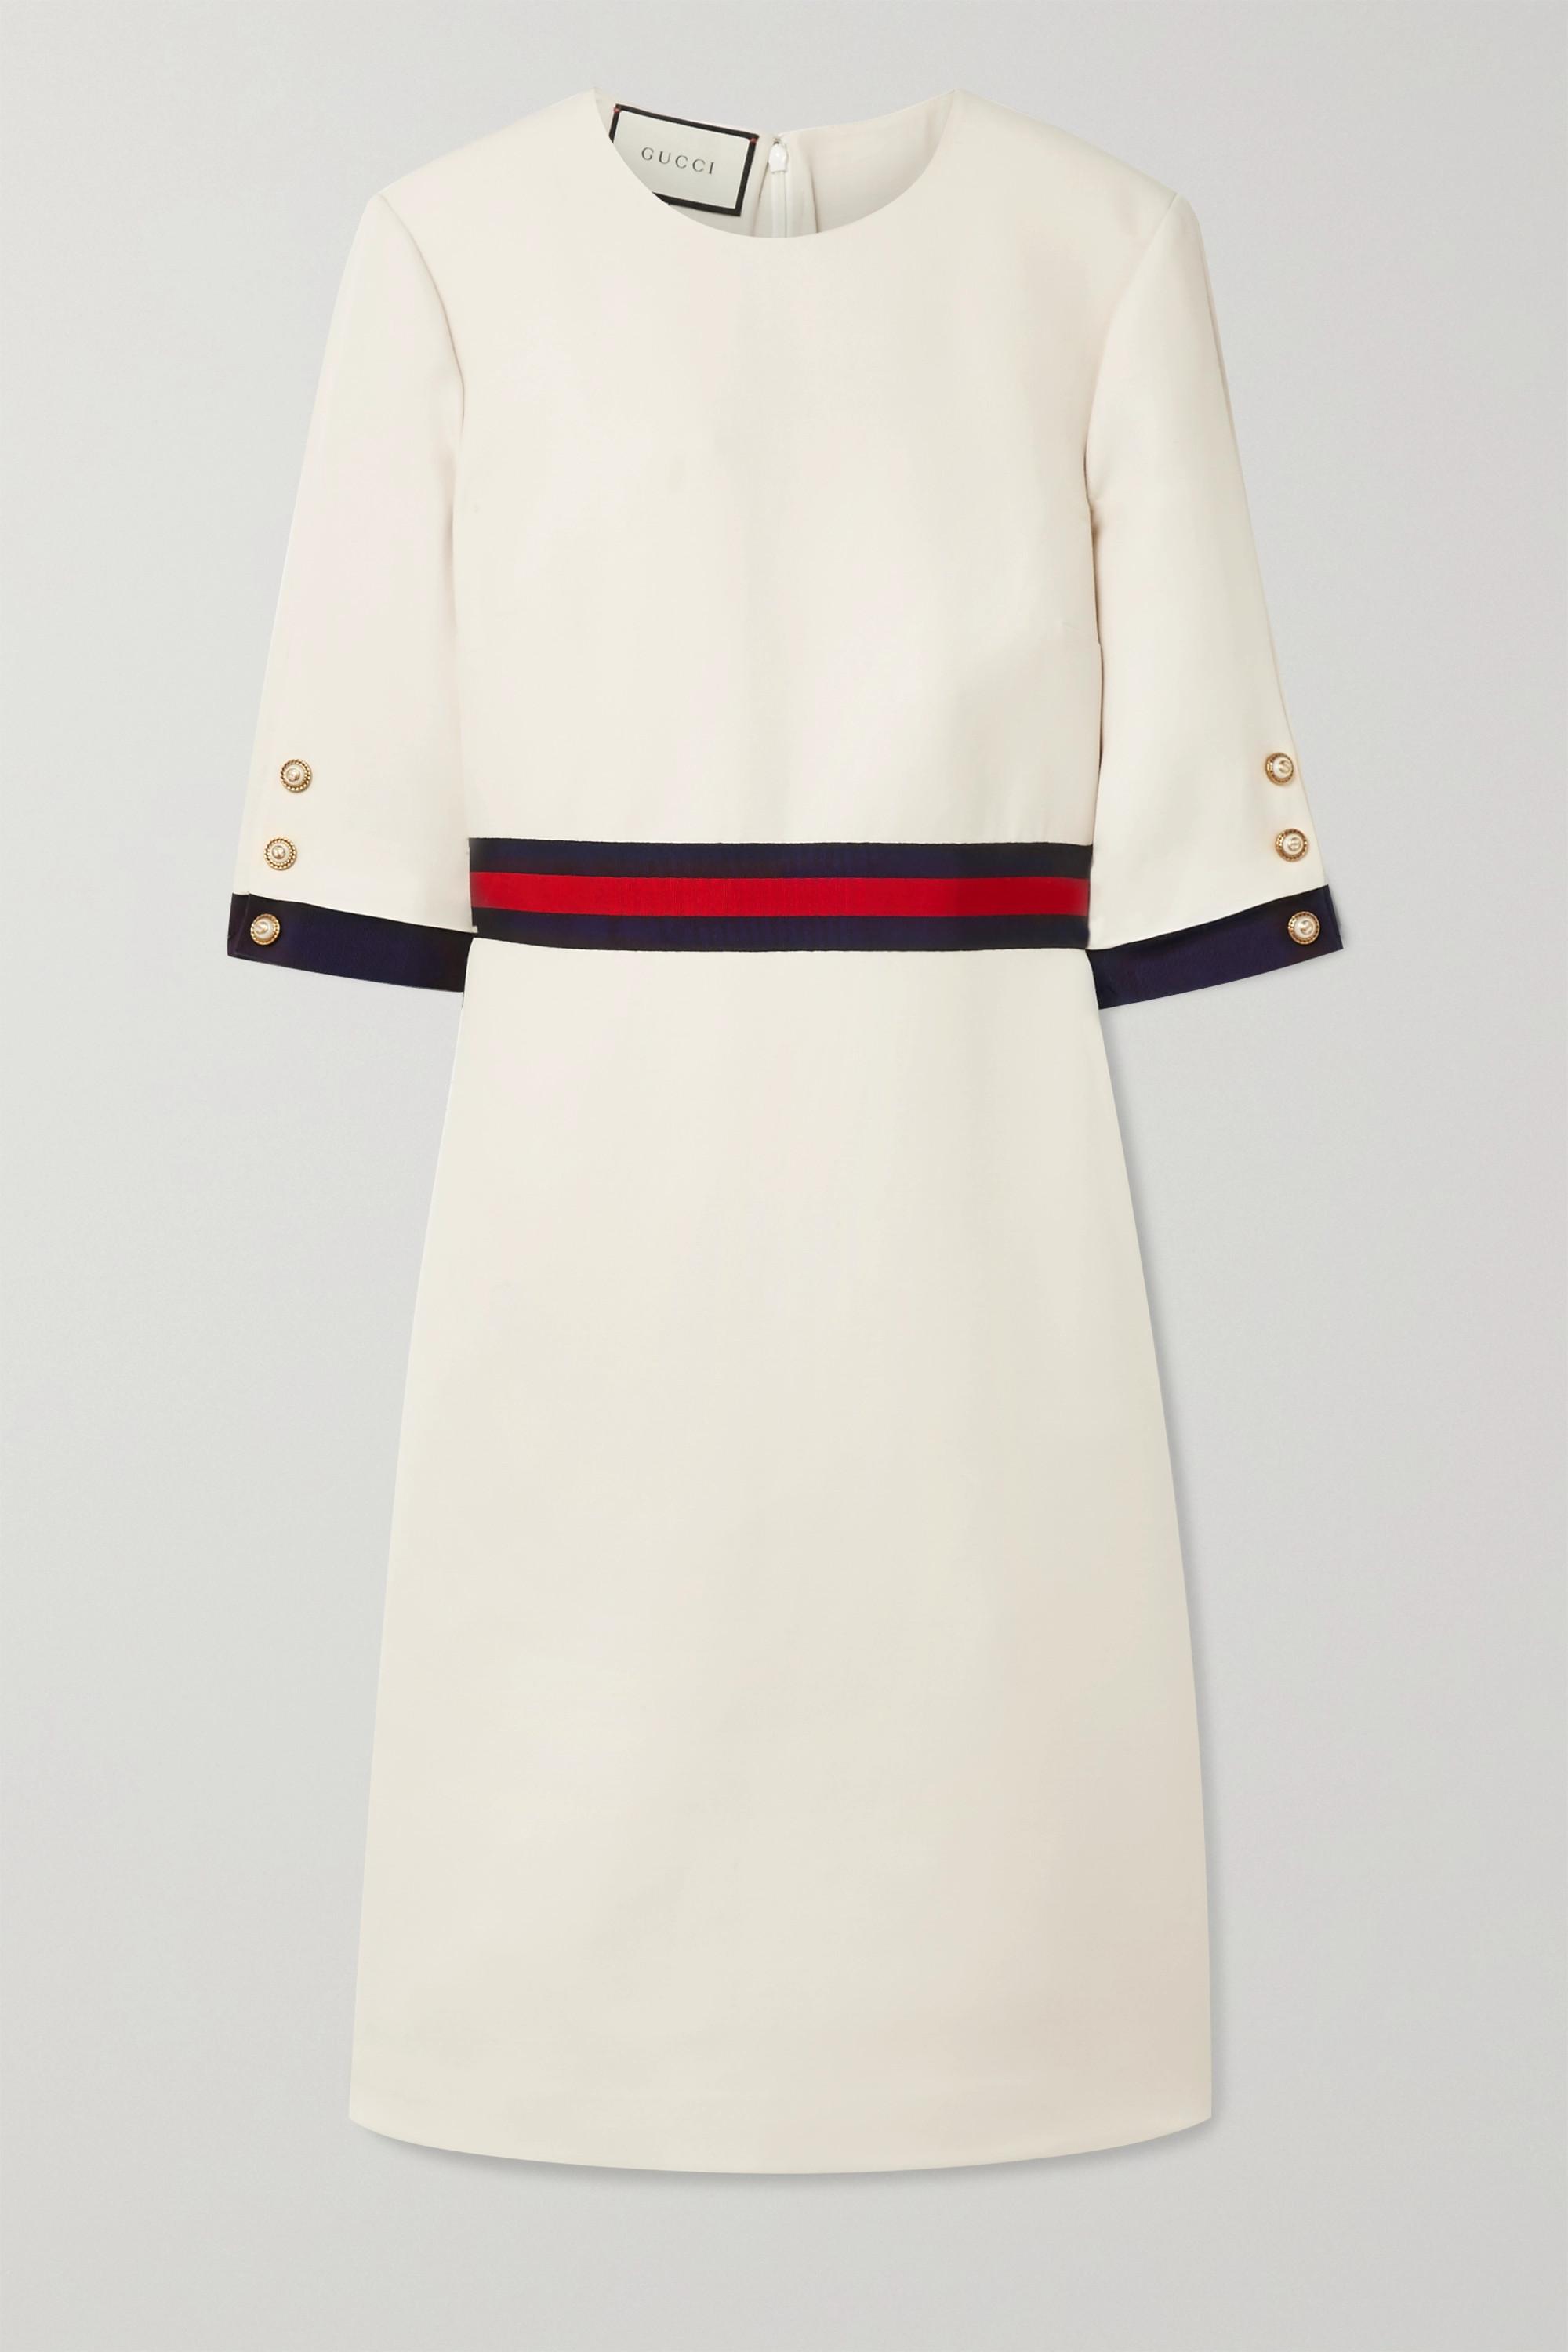 Gucci Grosgrain-trimmed Wool And Silk-blend Cady Dress in Ivory (White) |  Lyst Australia